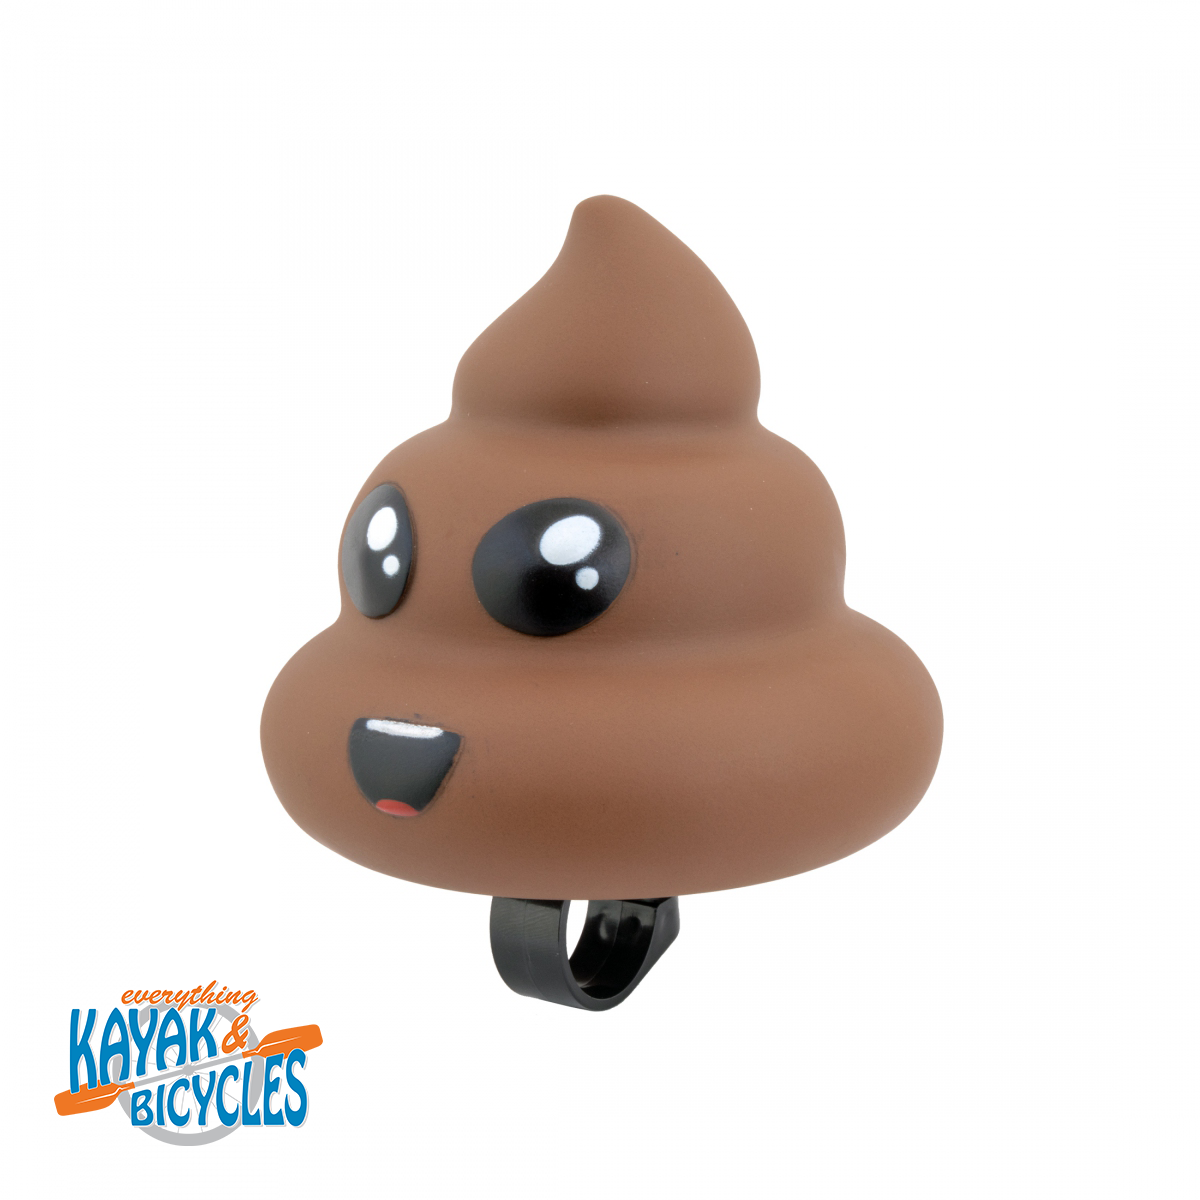 Poop Bike Horn 
Novelty horns that are great for kids and adults alike
Perfect for novice riders as well as serious riders who like a little flair, personality, or humor for their group rides
Fits most handlebars